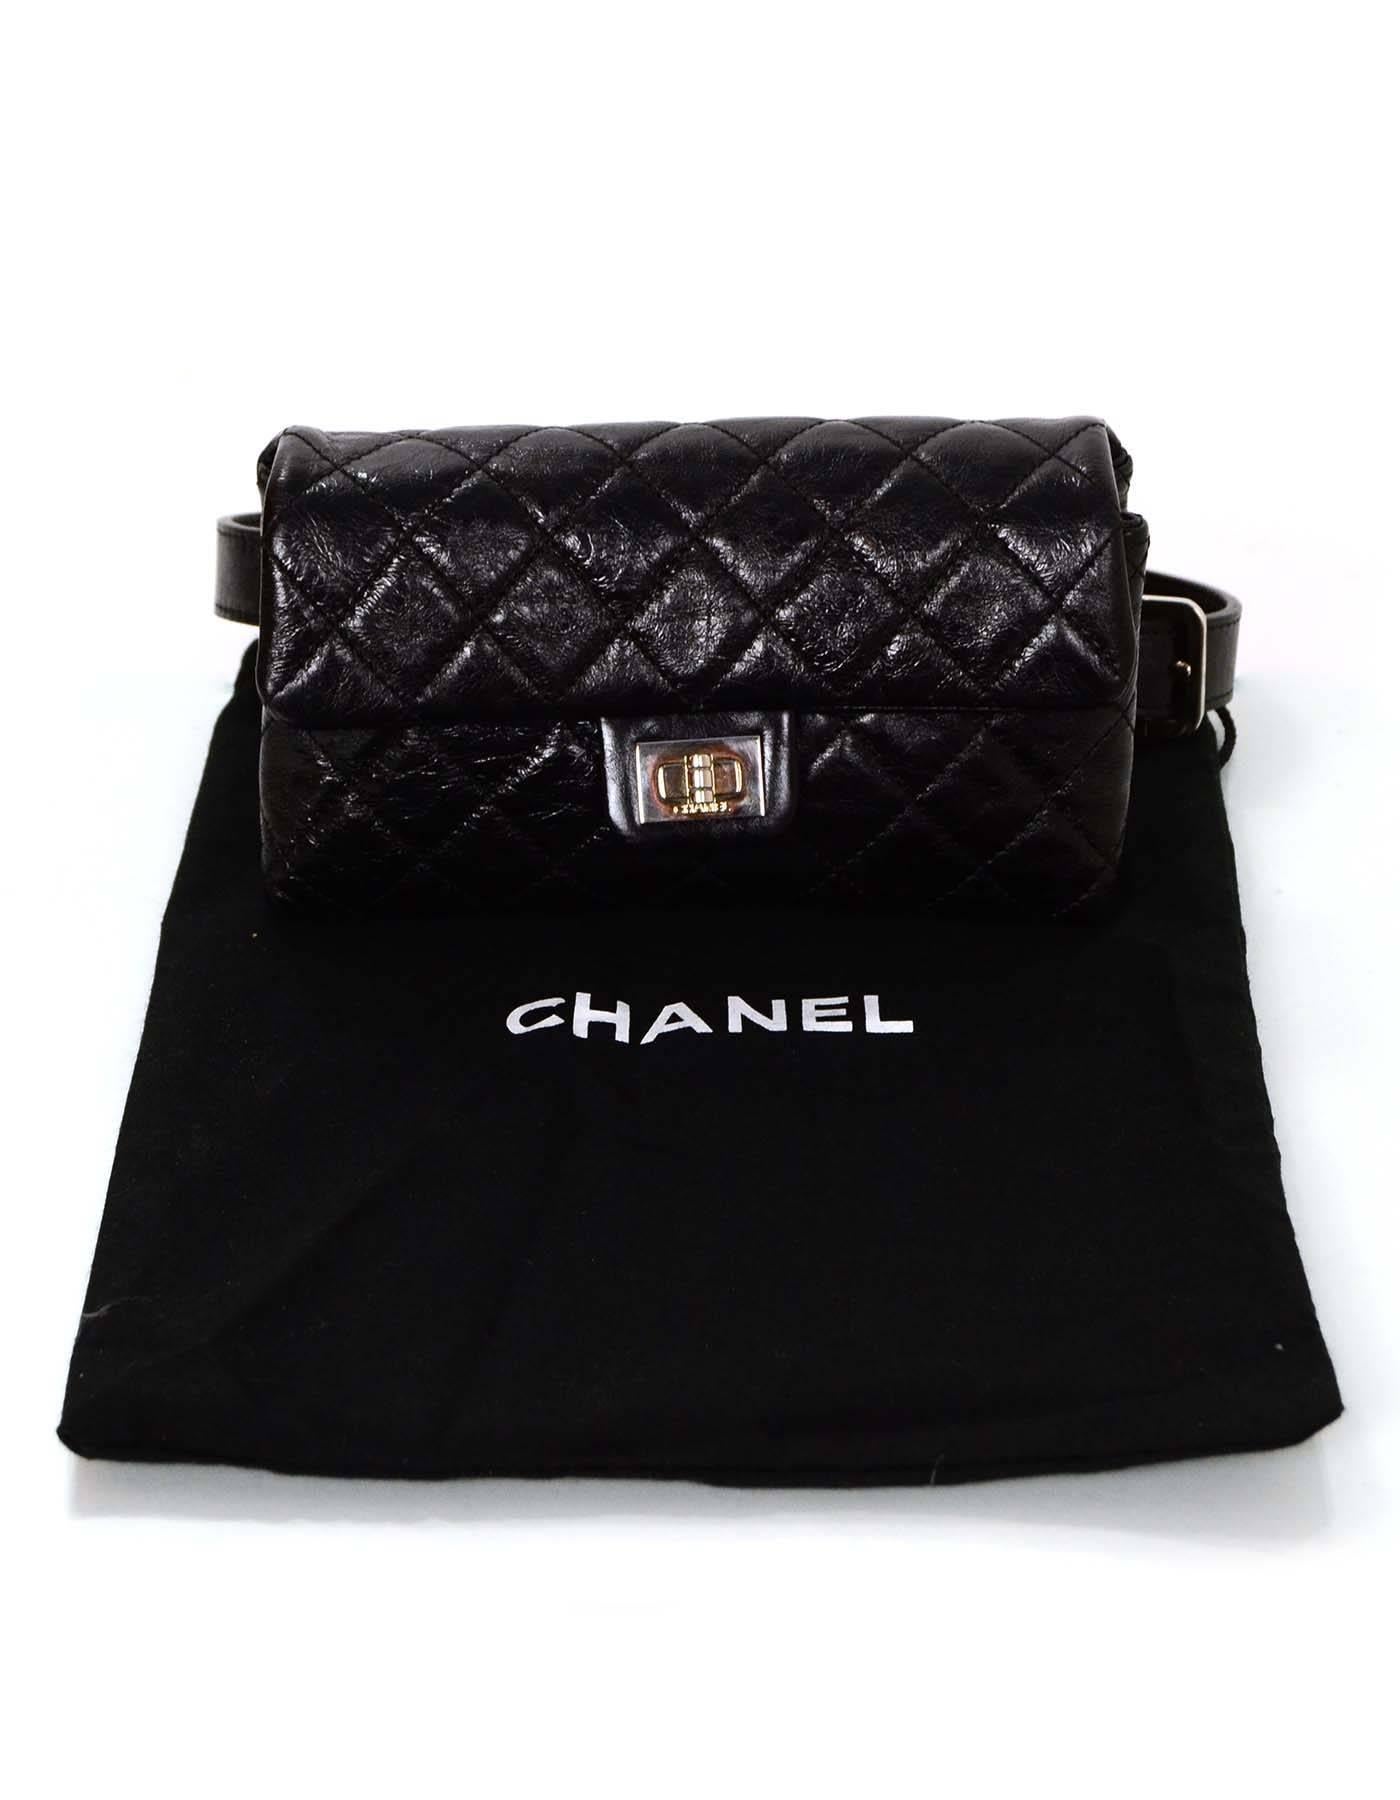 Chanel Black Distressed Quilted Leather 2.55 Belt Bag Sz 36 5